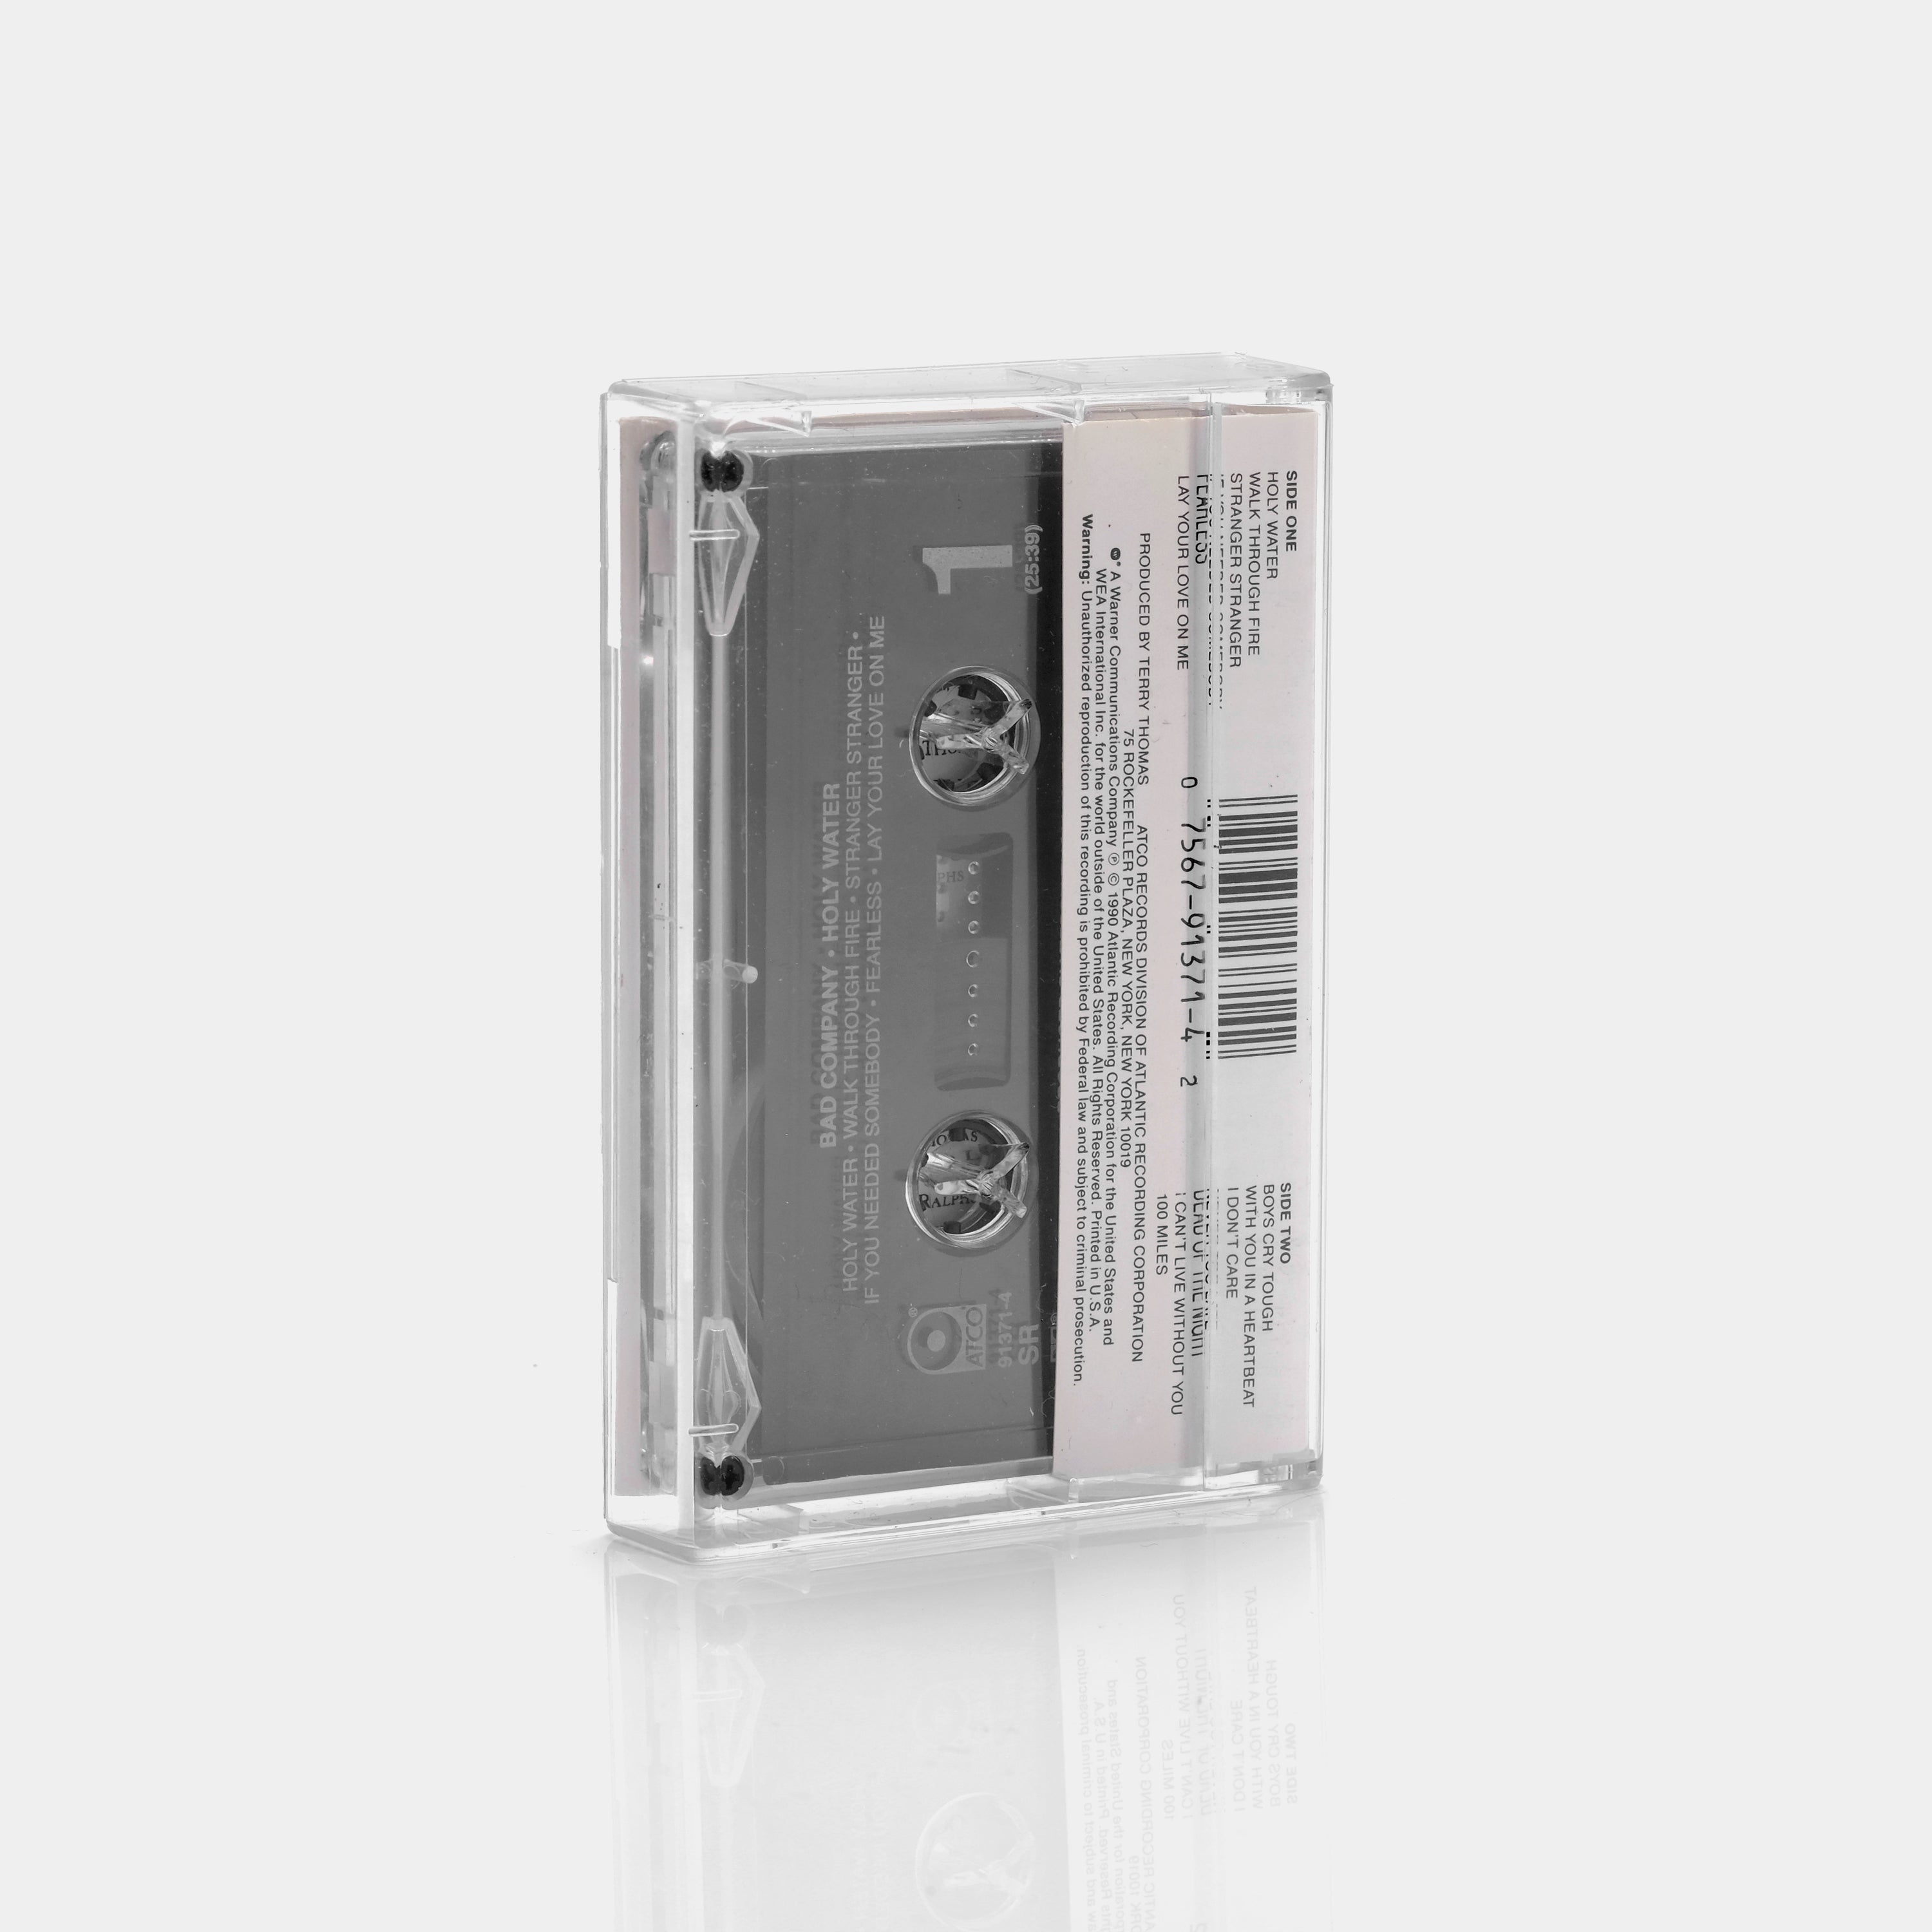 Bad Company - Holy Water Cassette Tape